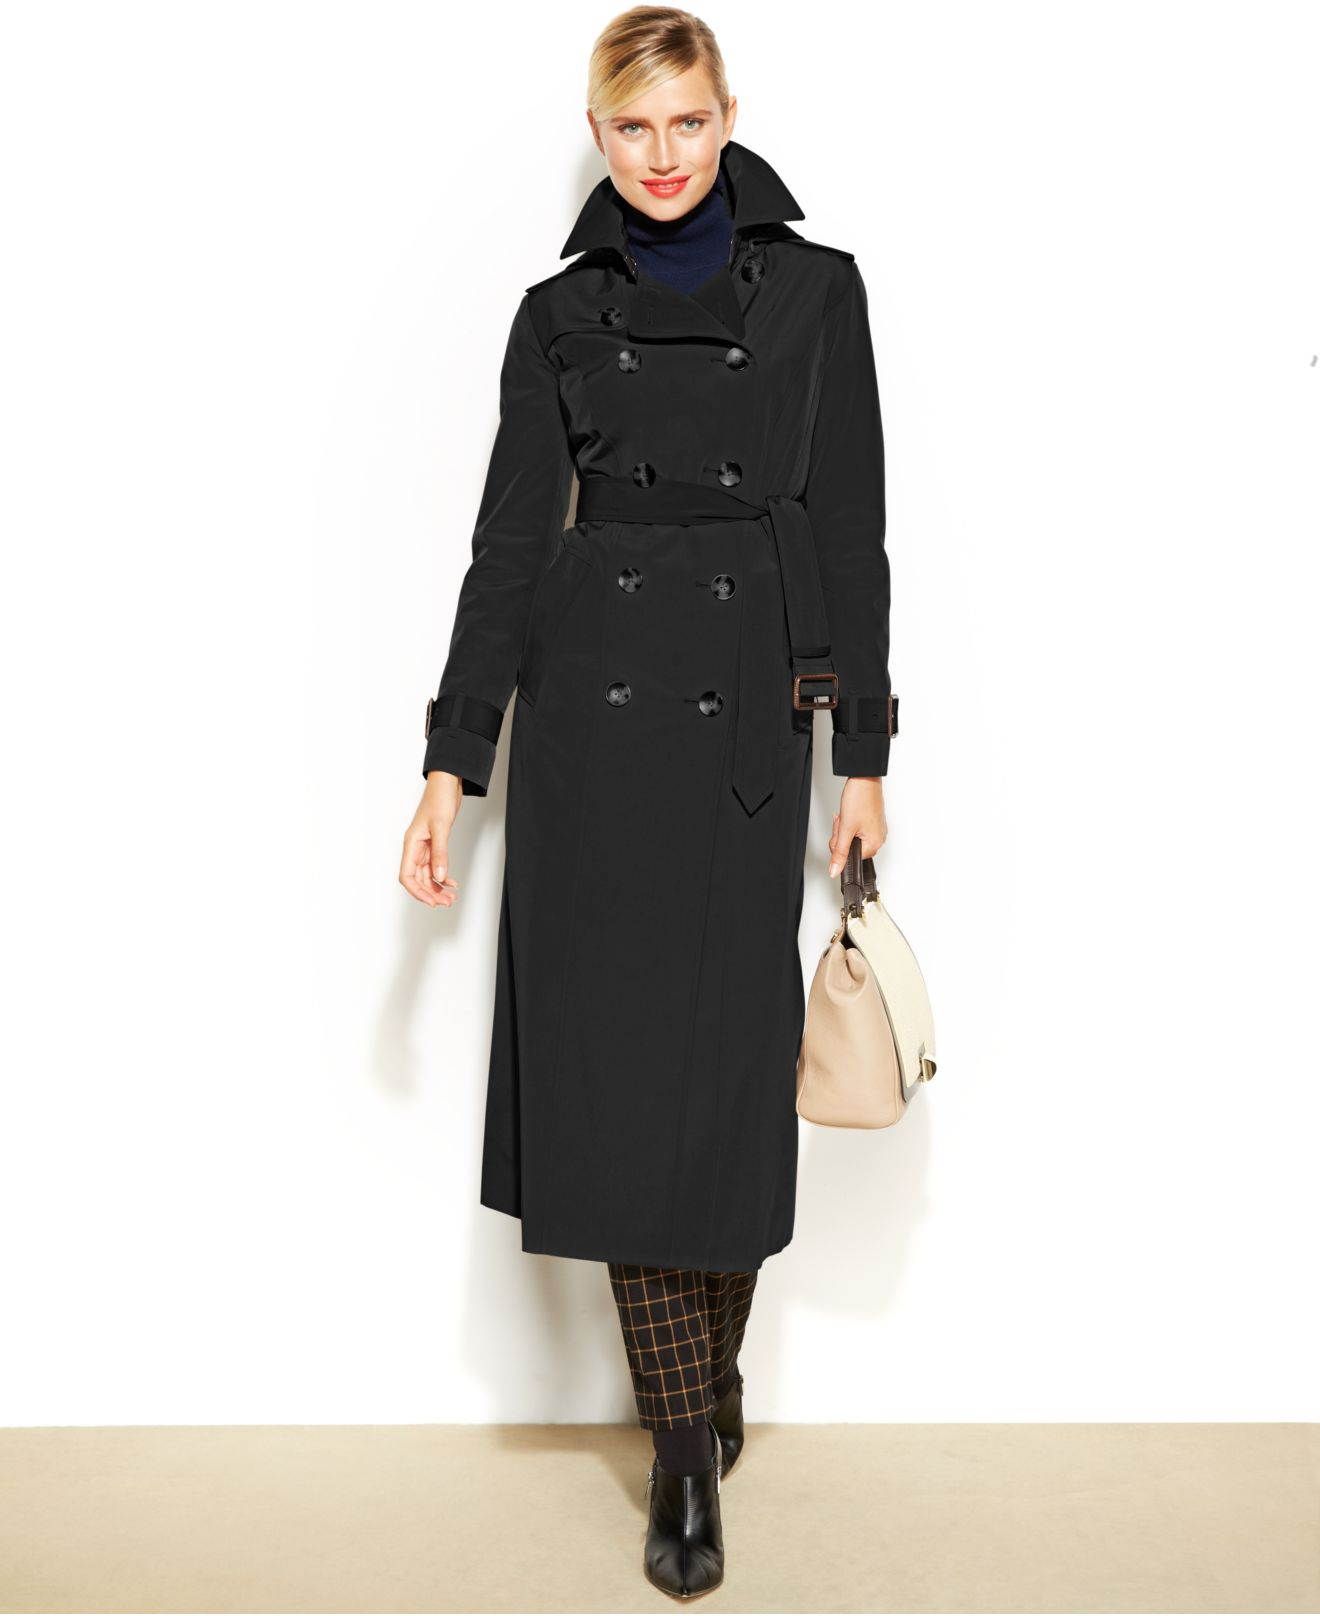 Lyst - London Fog Hooded Belted Maxi Trench Coat in Black